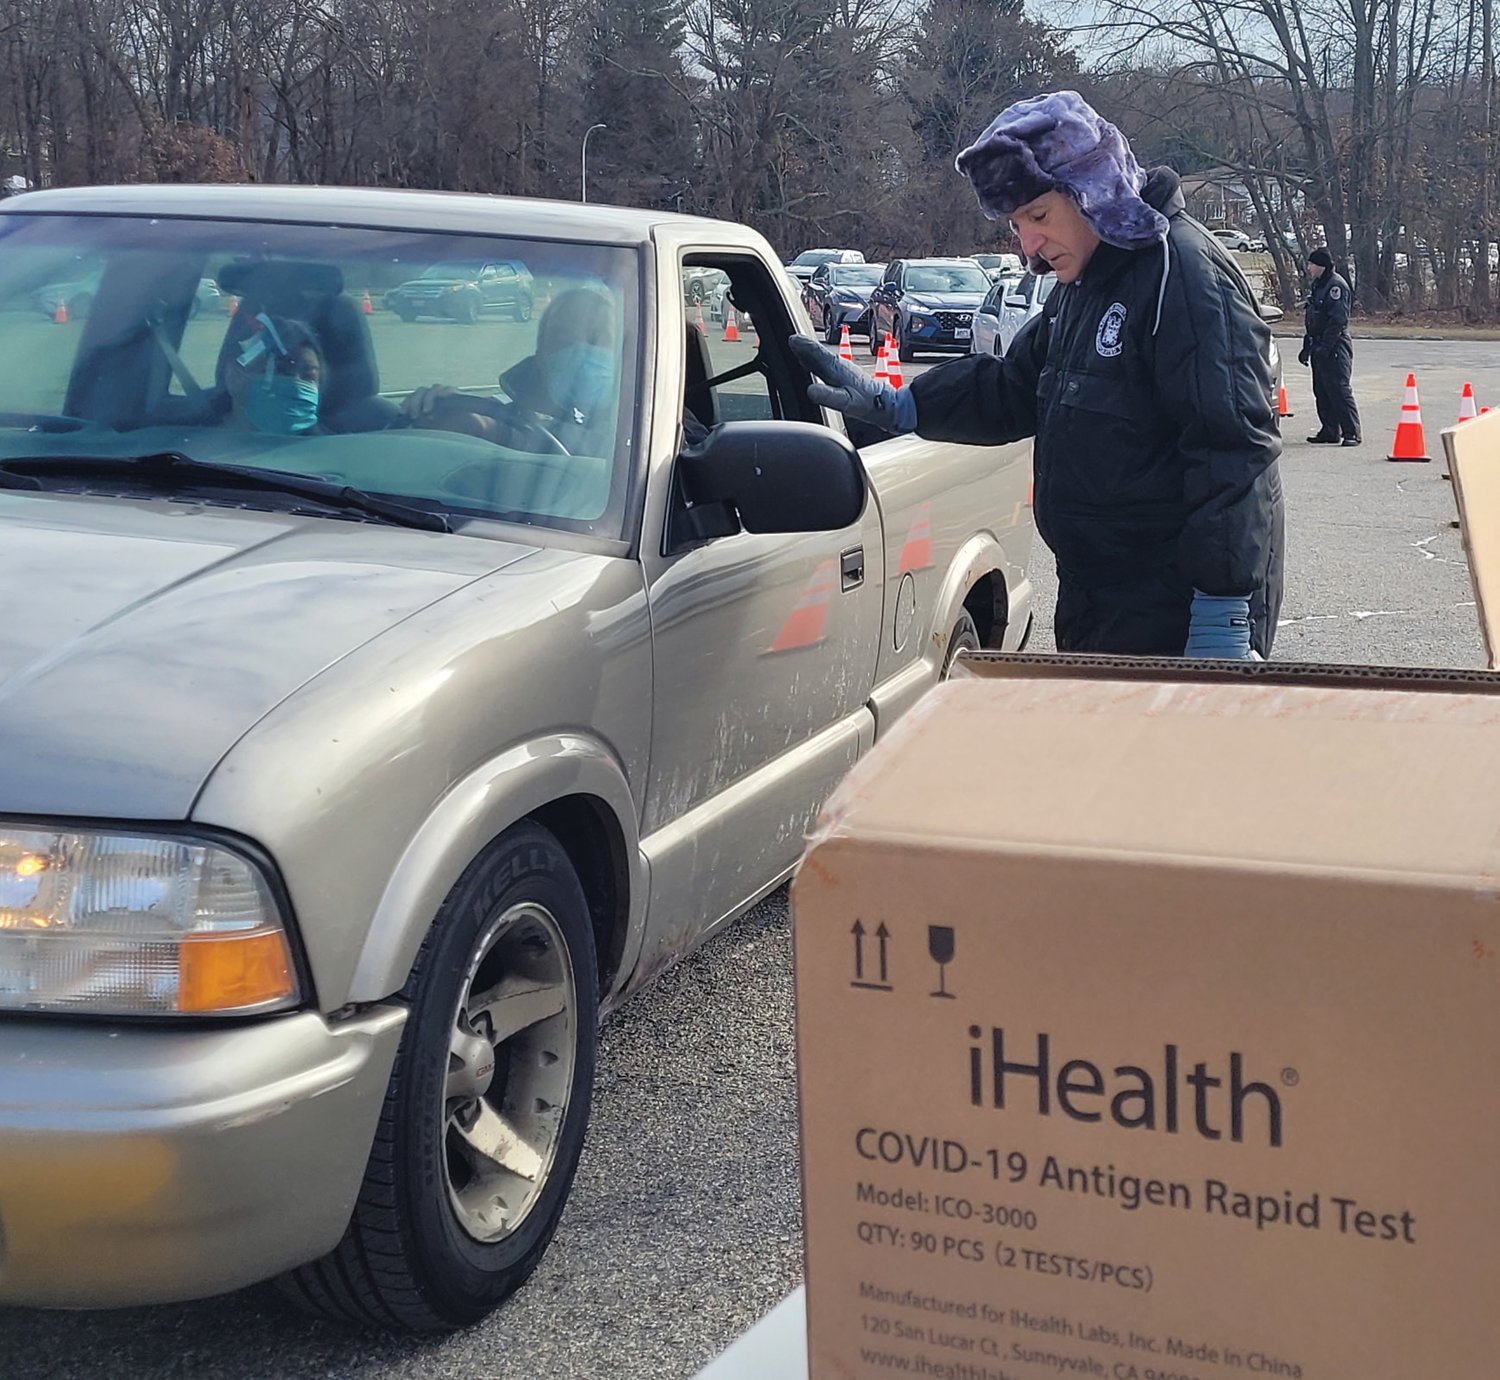 MAYORAL MISSION: Town officials gathered several weeks ago in the Johnston High School parking lot to distribute thousands of test kits. Johnston Mayor Joseph M. Polisena braved the cold to help hand out the tests.